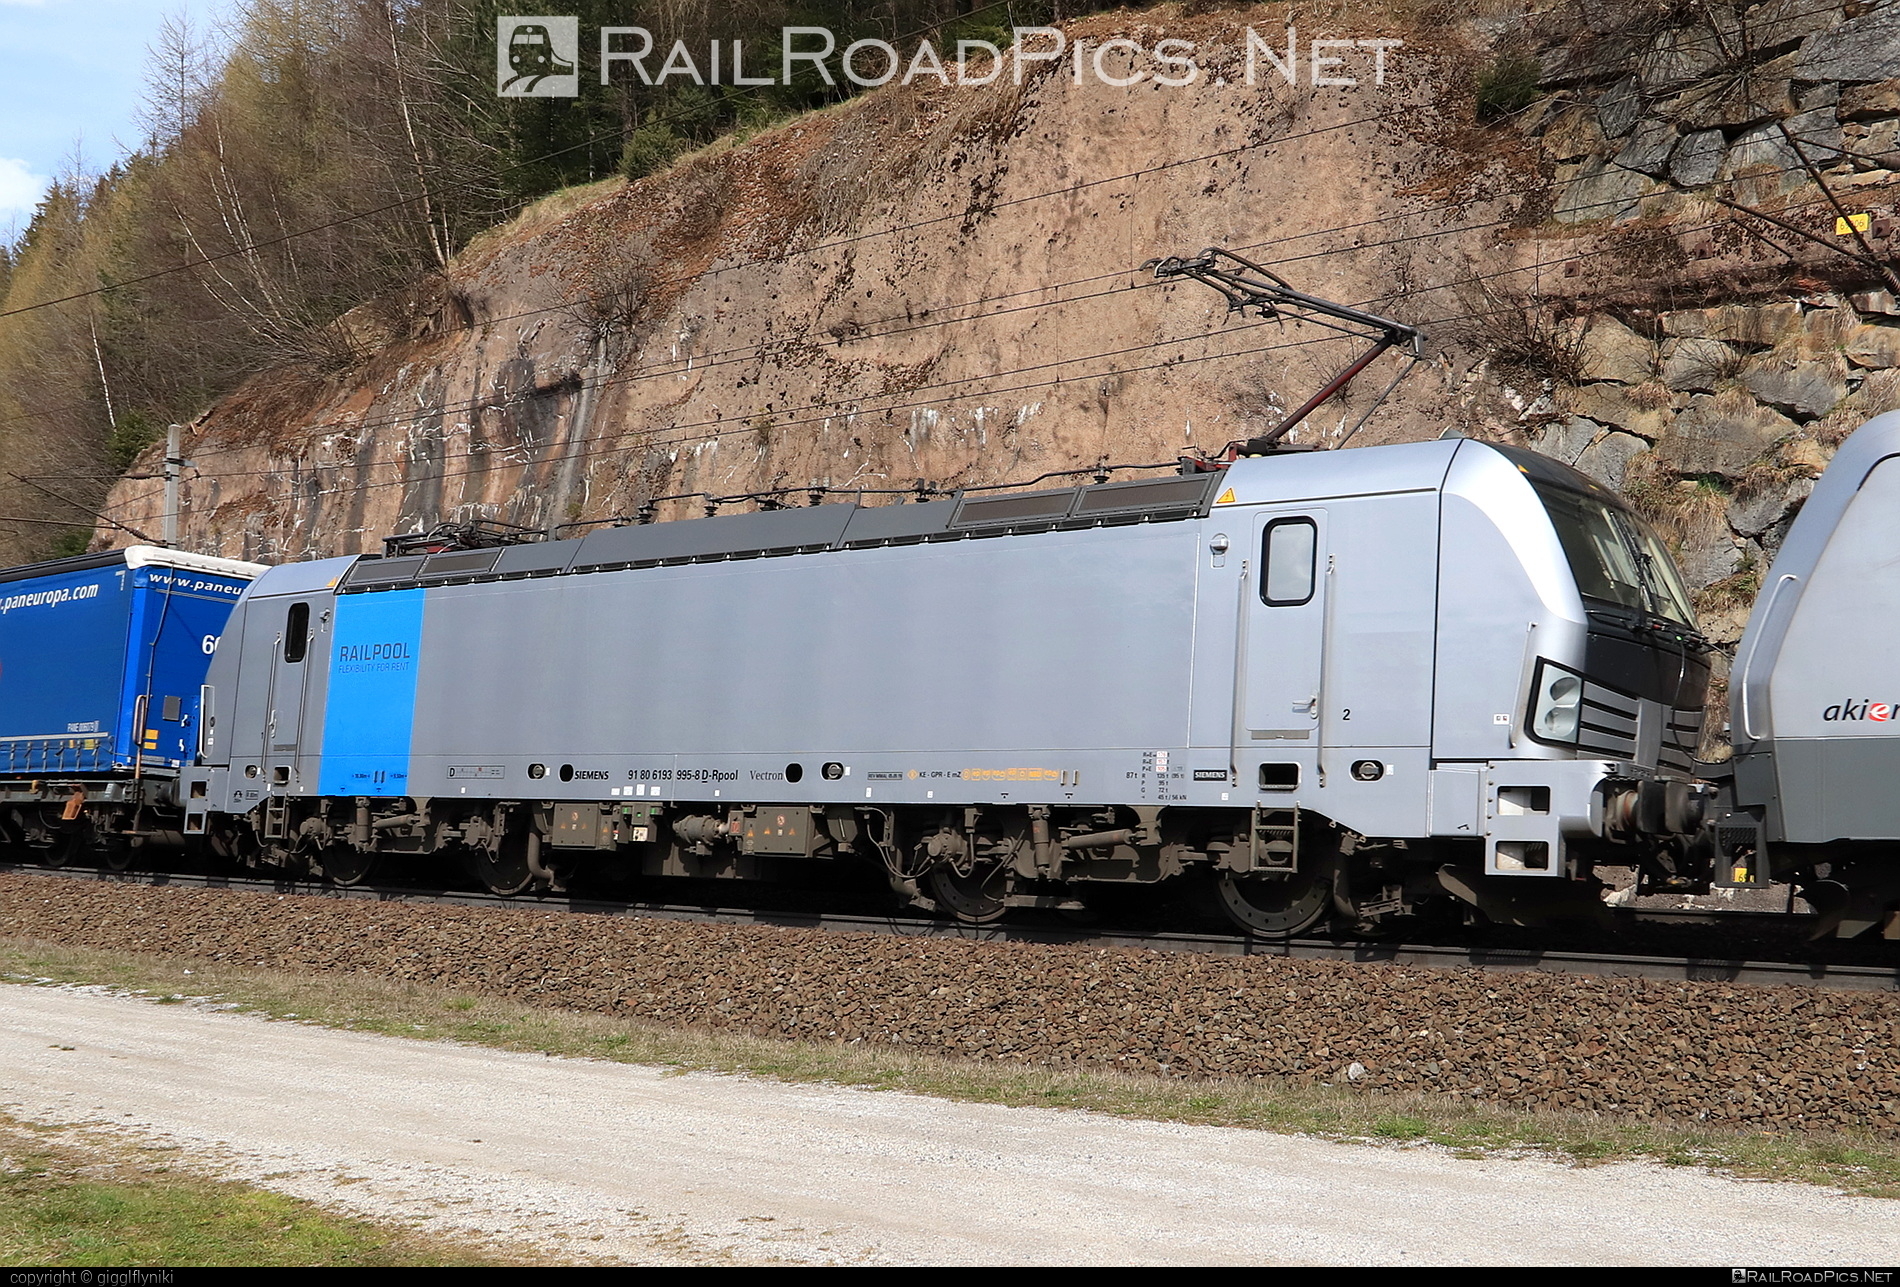 Siemens Vectron AC - 193 995-8 operated by TXLogistik #railpool #railpoolgmbh #siemens #siemensVectron #siemensVectronAC #txlogistik #vectron #vectronAC